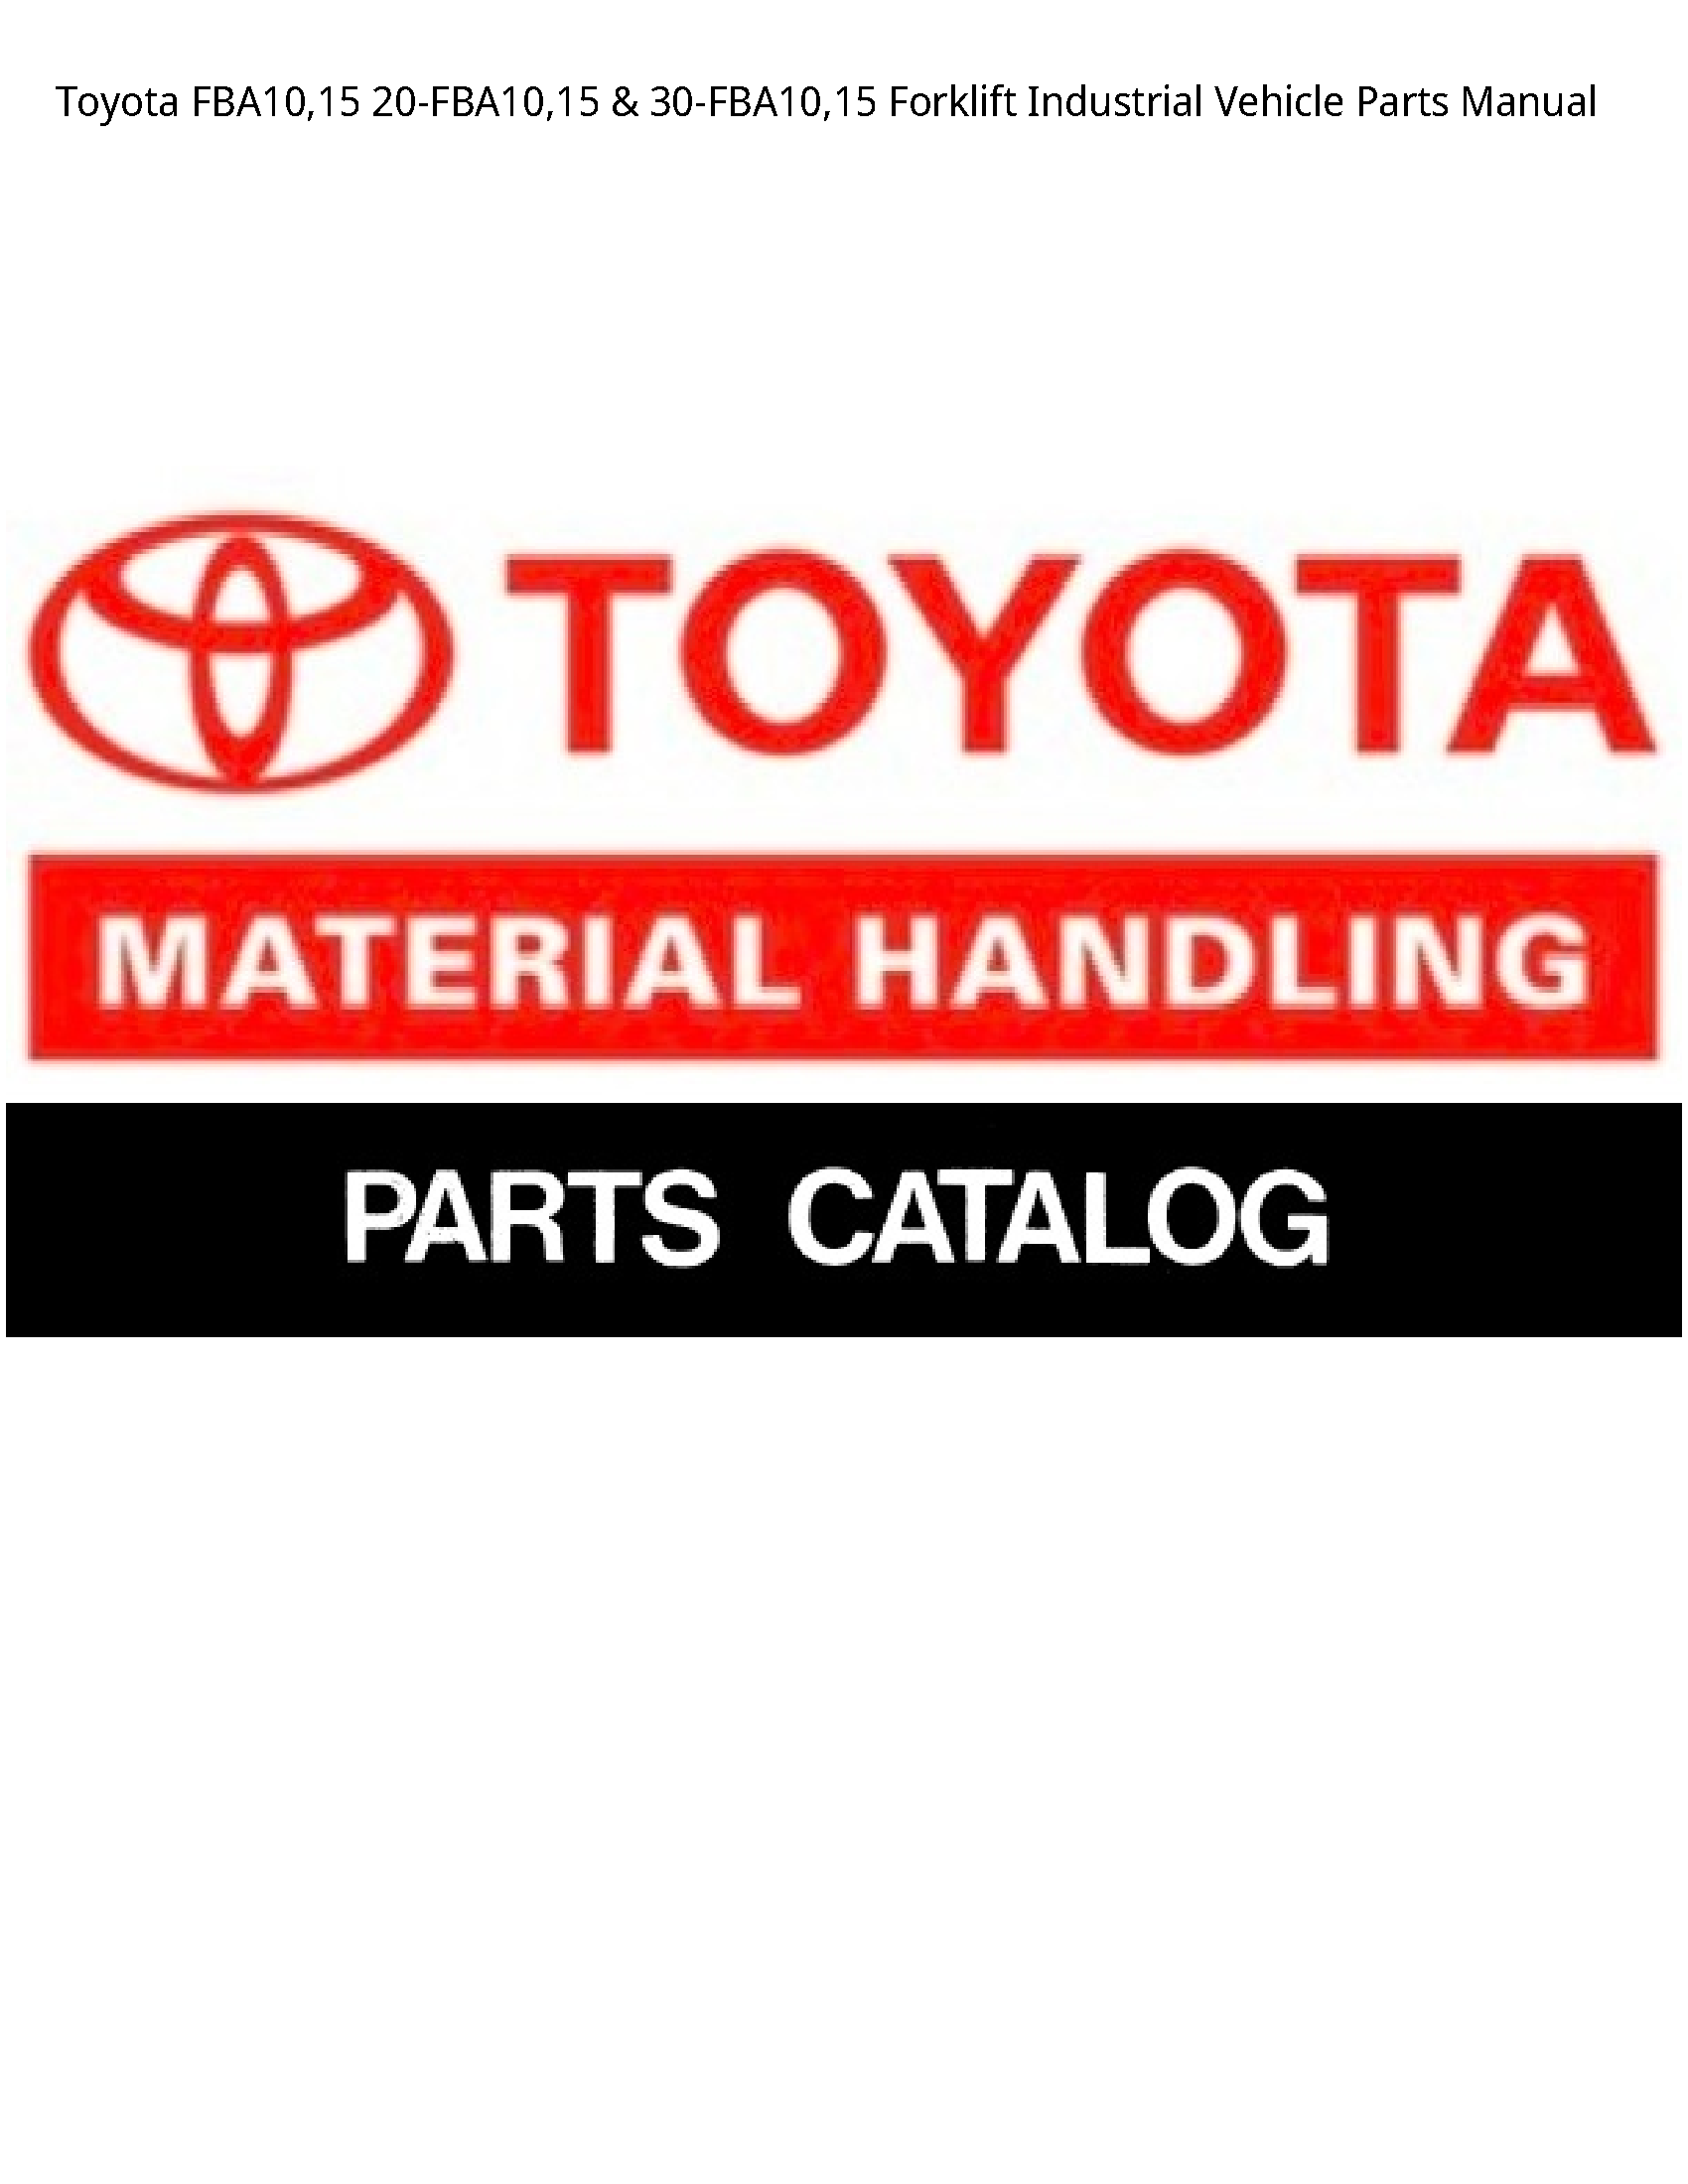 Toyota FBA10 Forklift Industrial Vehicle Parts manual